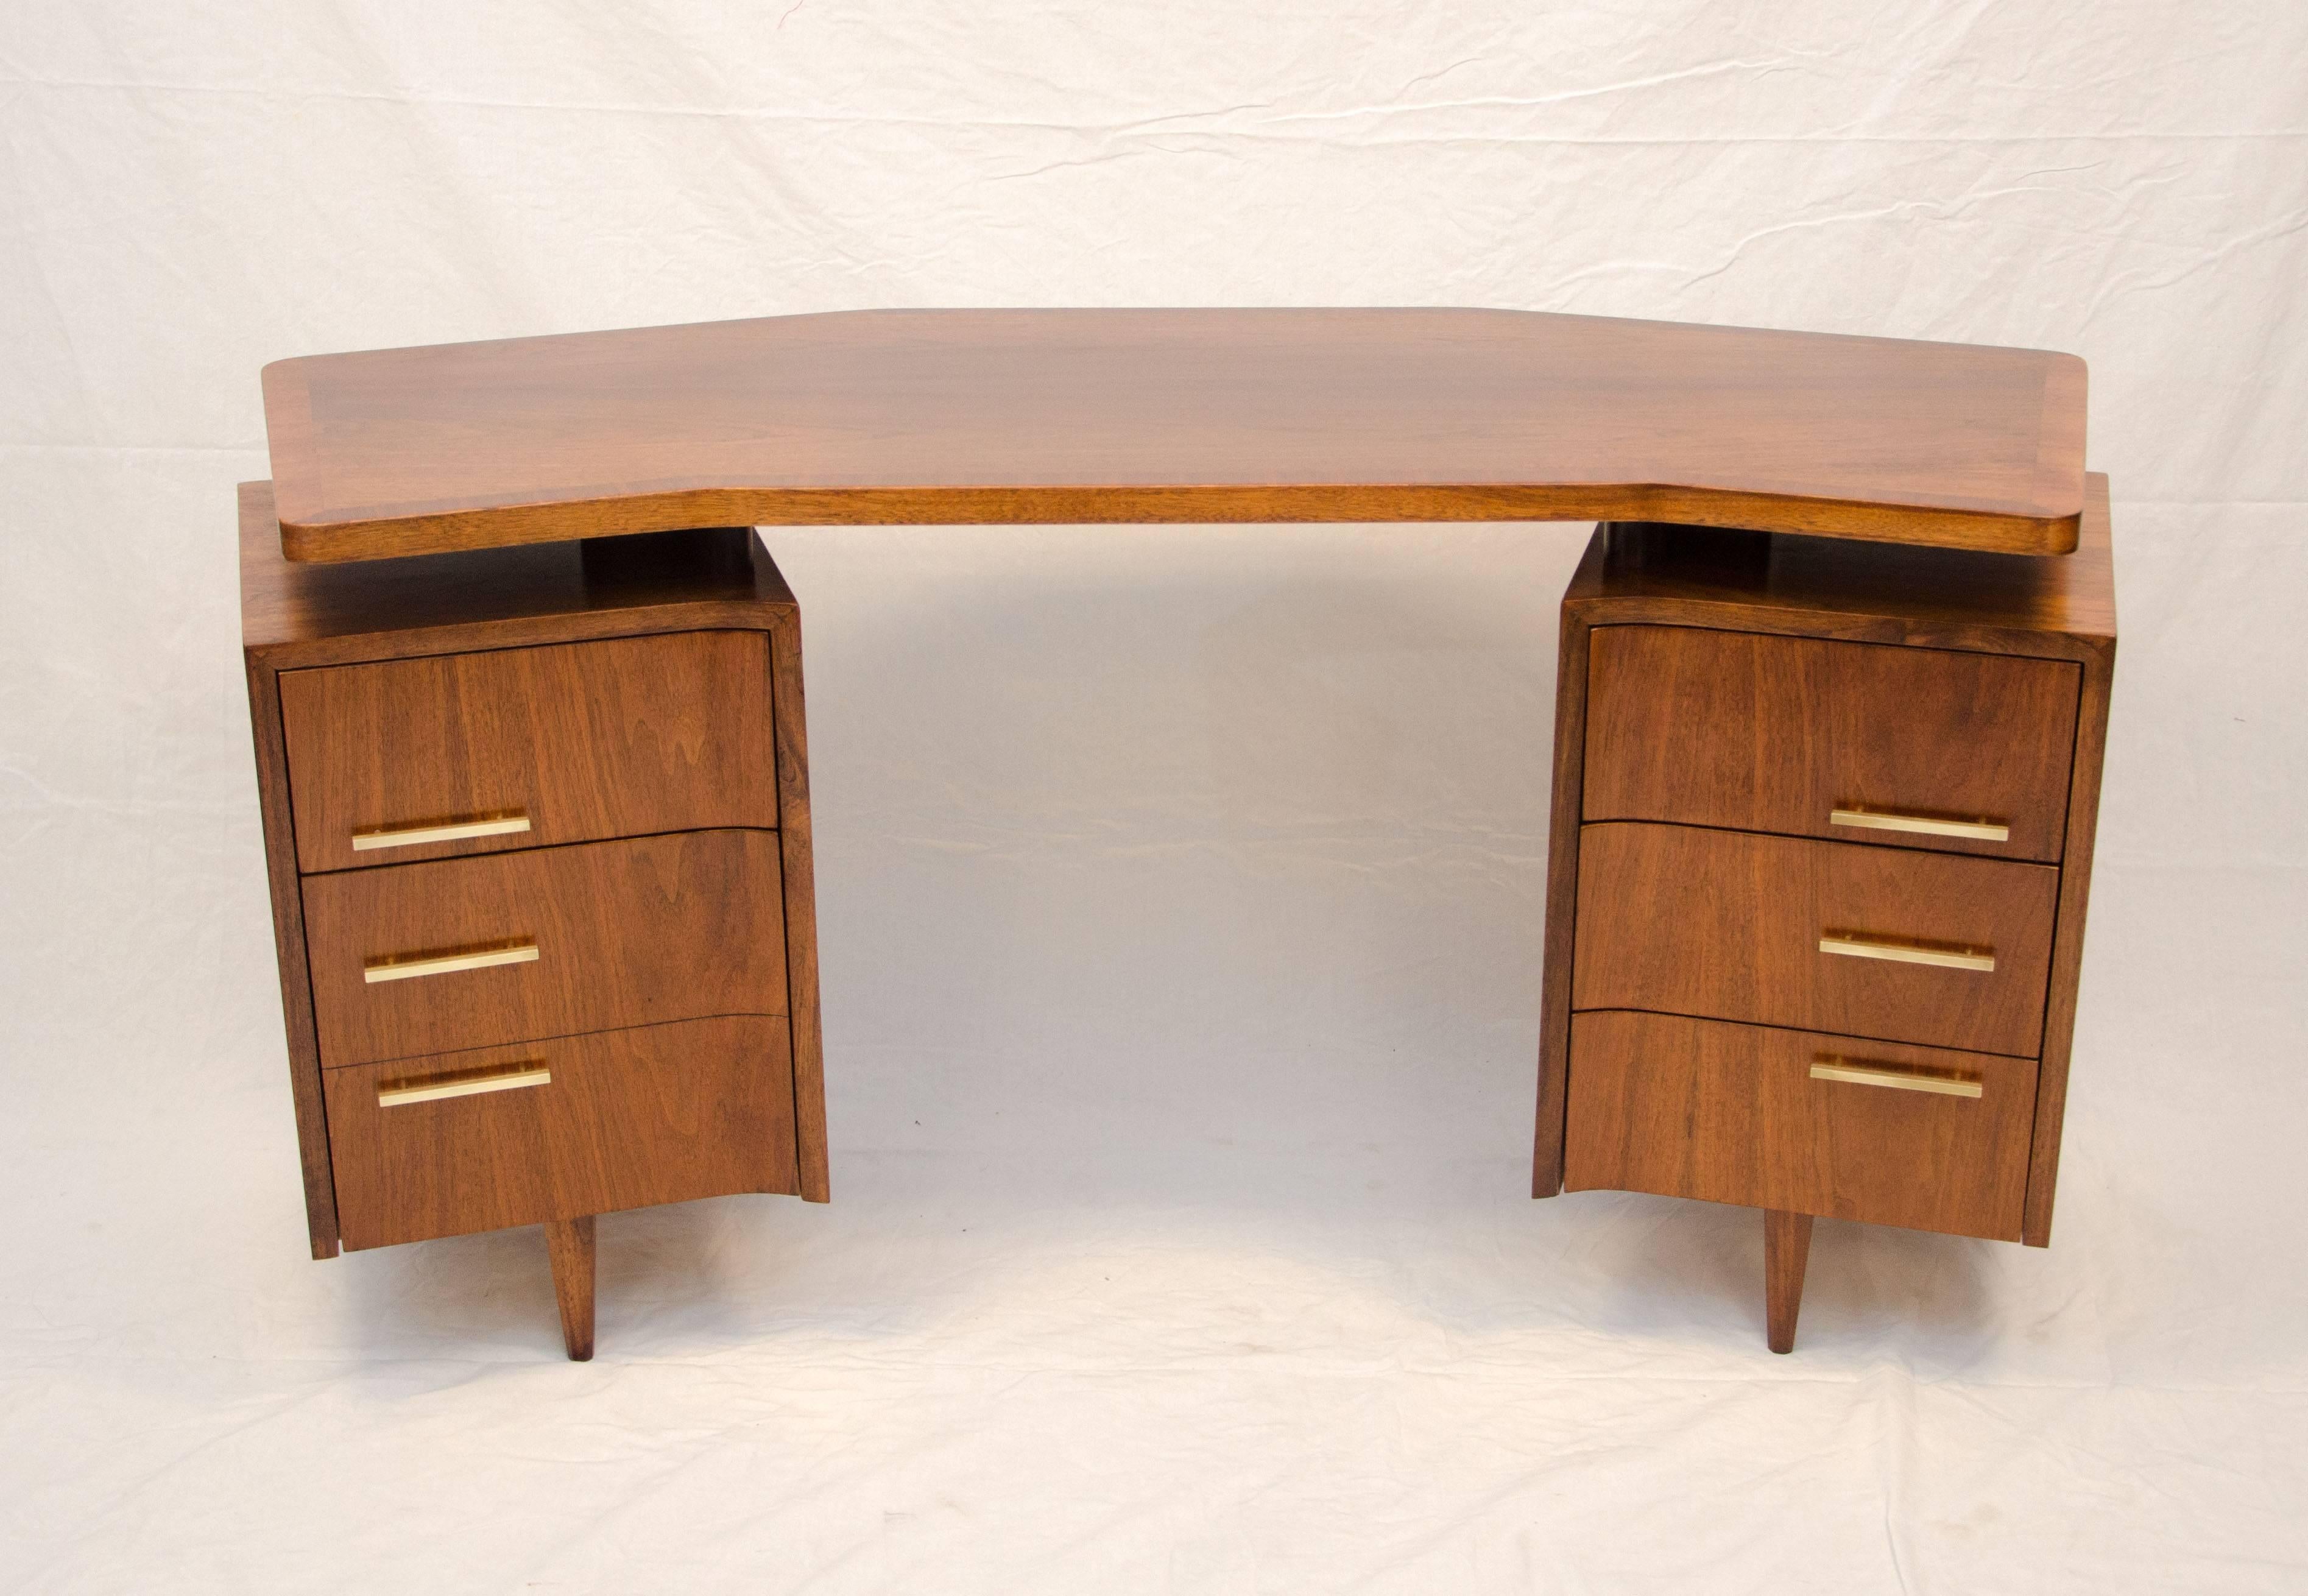 Unusual design mid century walnut curved writing desk with a floating top. The drawer pedestals are about an 1 1/2